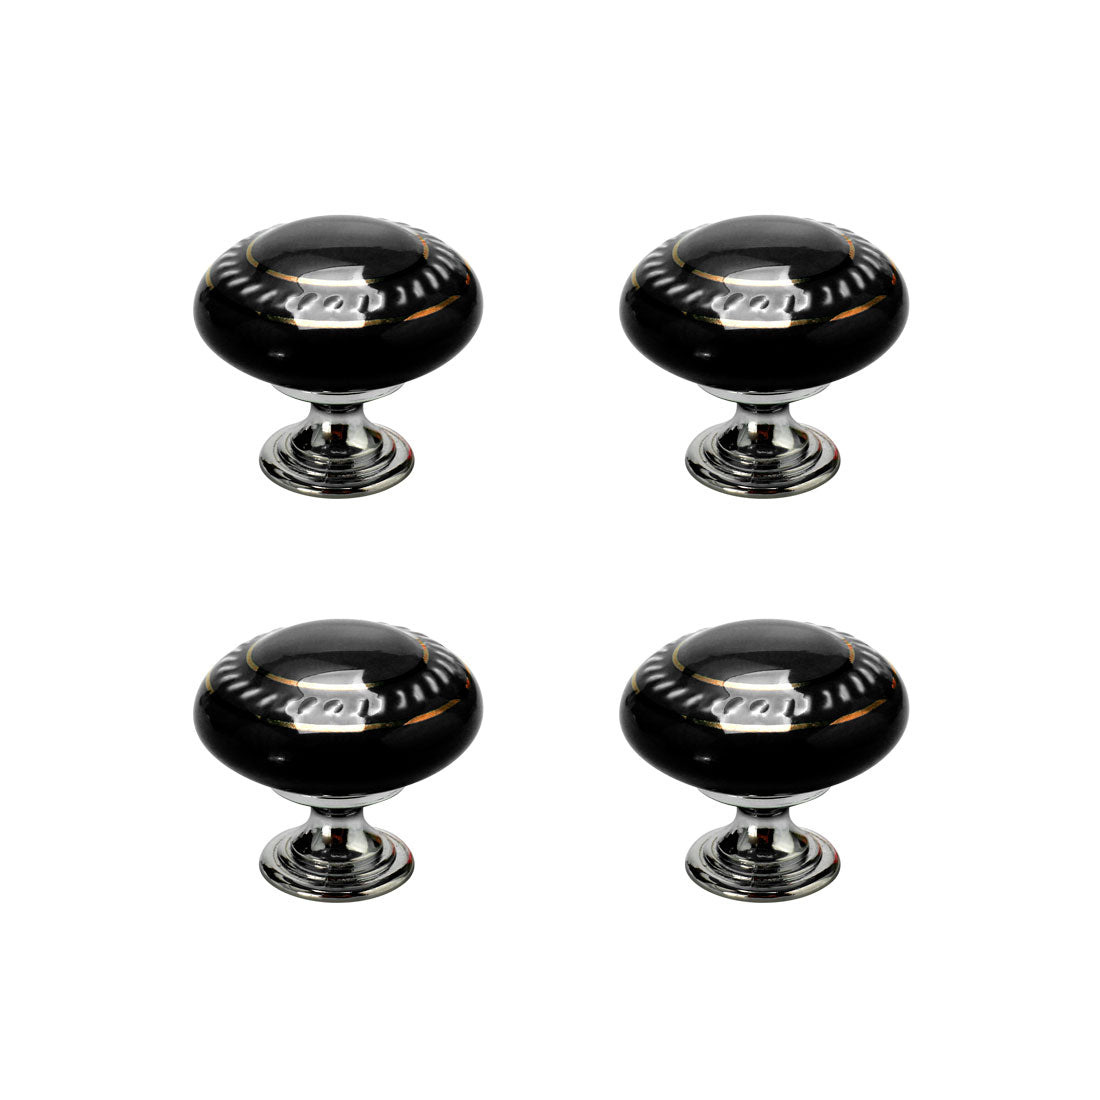 uxcell Uxcell Ceramic Vintage Knobs Drawer Pull Handle Cupboard Dresser 4pcs Gold Circle Black